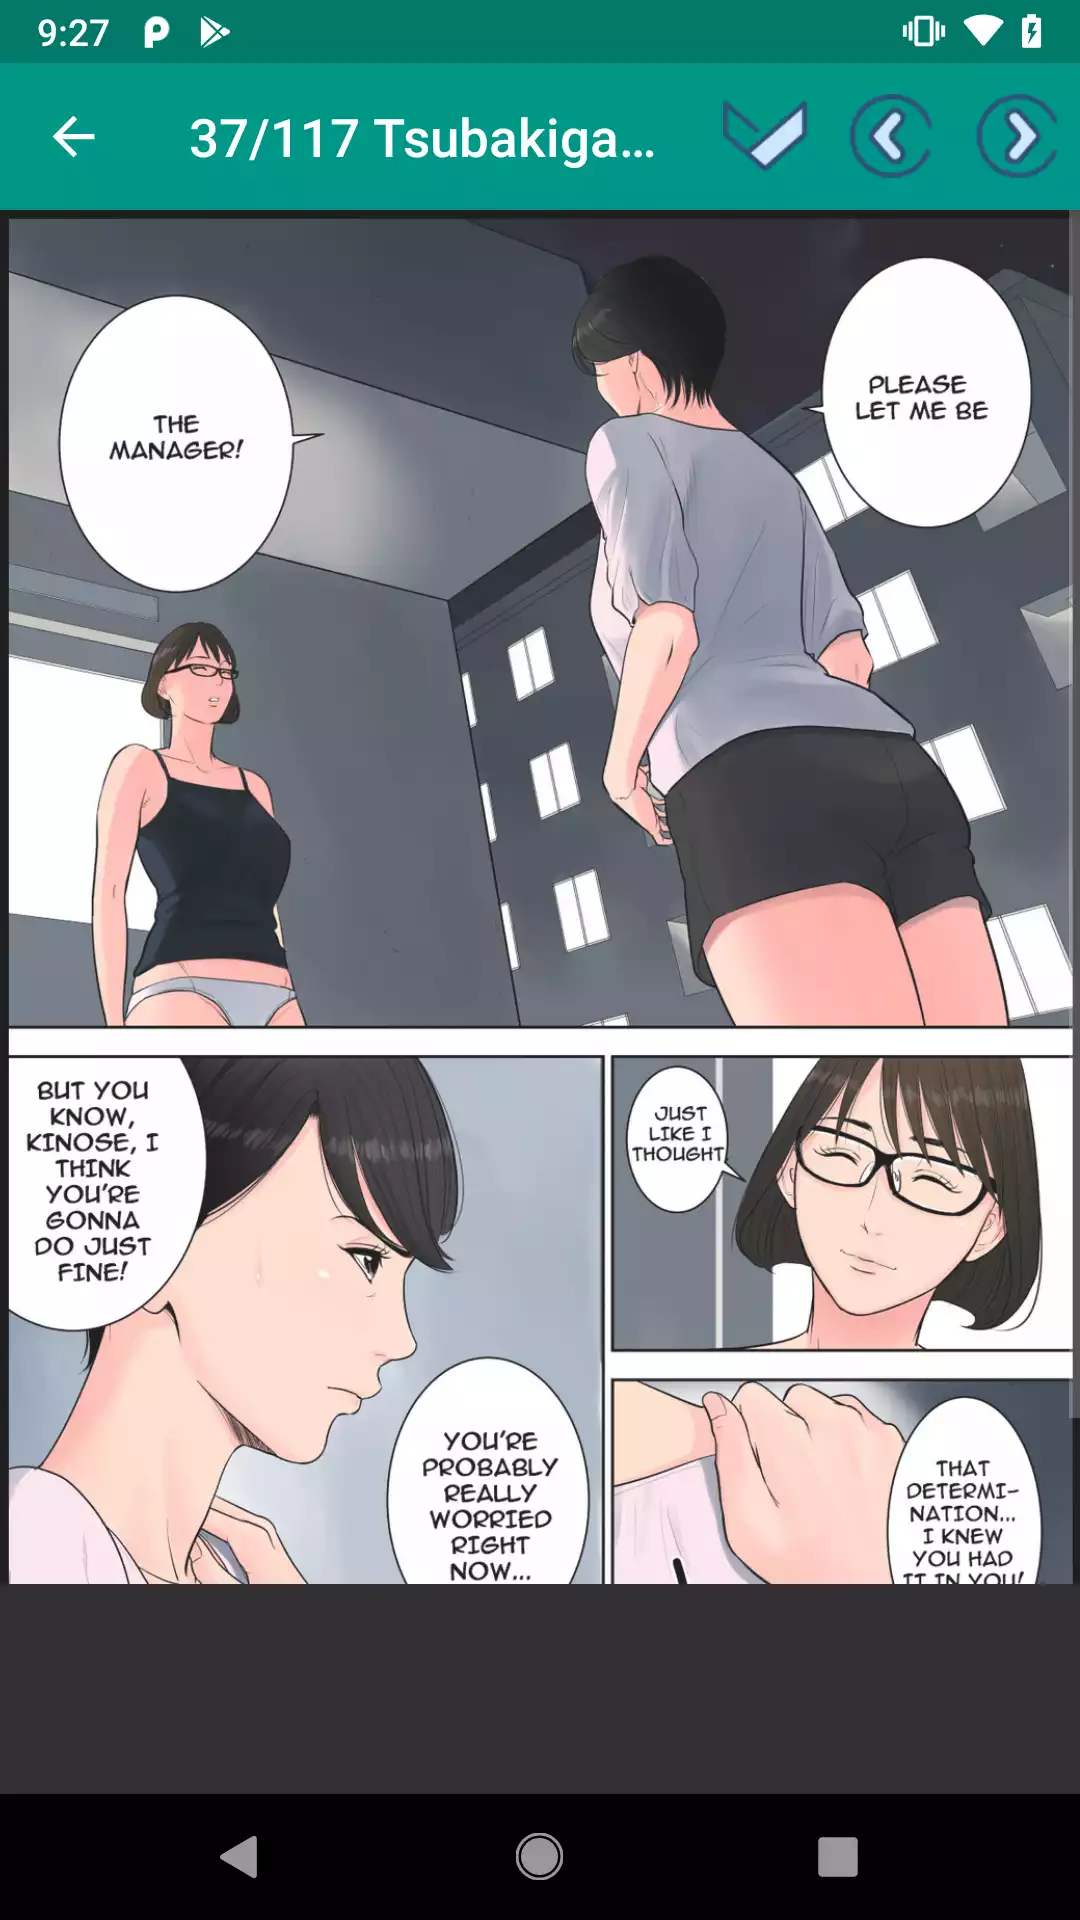 Tsubakigaoka Danchi no Kanrinin pic,pictires,apps,henta,ics,adult,hentai,app,xxx,picw,collection,apk,ios,anime,comics,andriod,hot,picture,downloads,sexy,porn,android